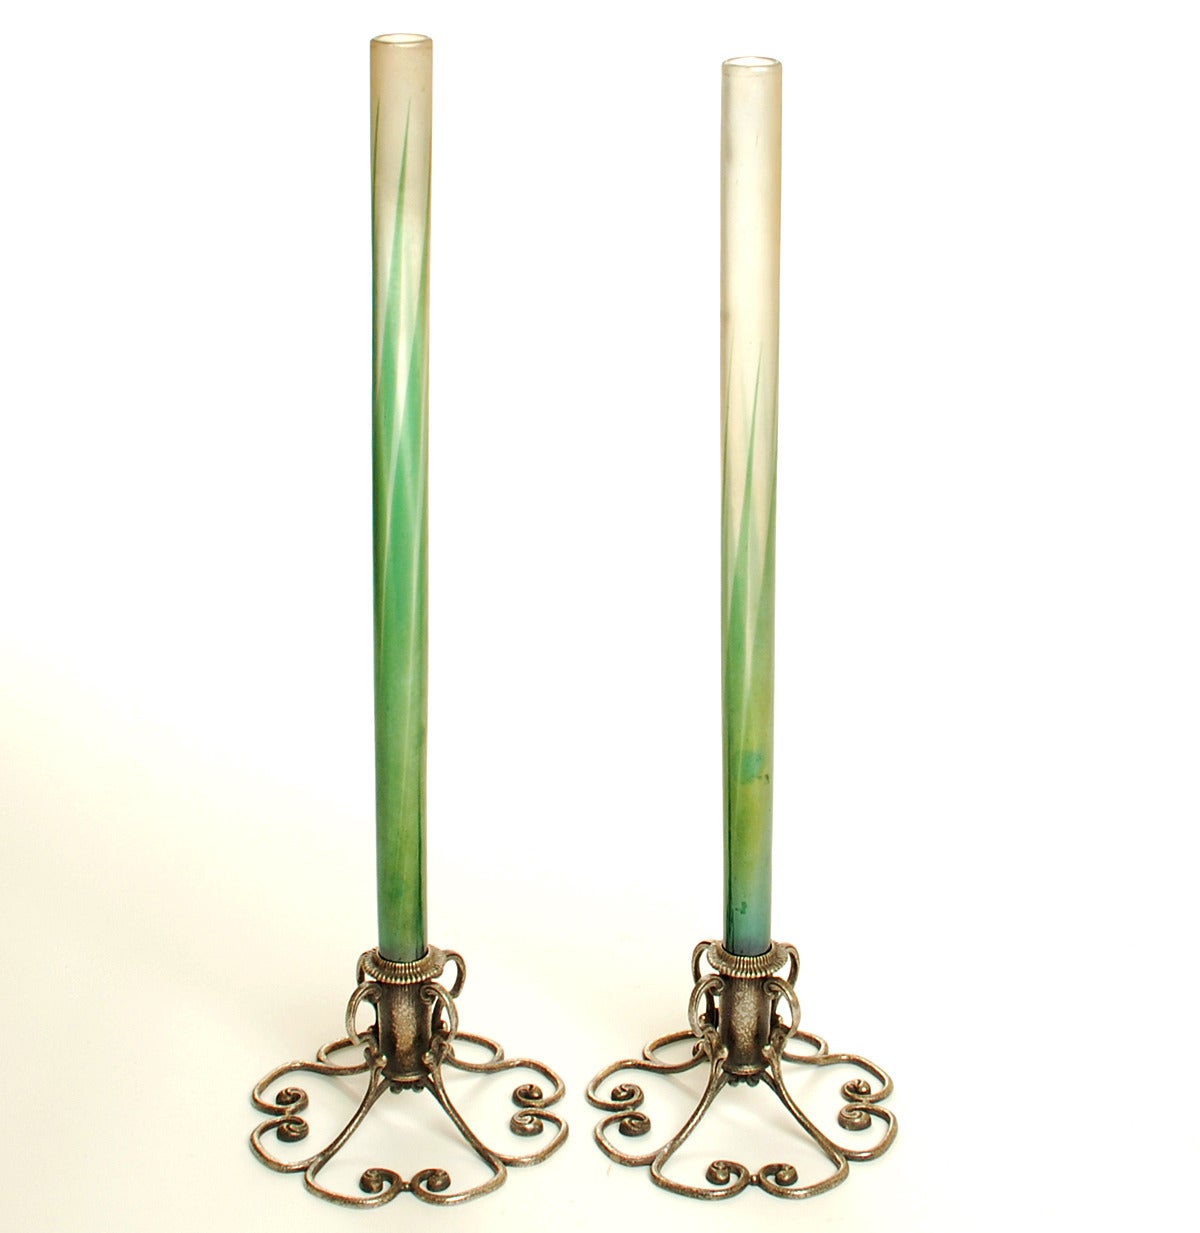 A pair of exceedingly fine and rare early 20th century Tiffany vases with original 'favrile' art glass stems supported by original art nouveau bases. Favrile glass is a type of iridescent glass that was designed and patented by Louis Comfort